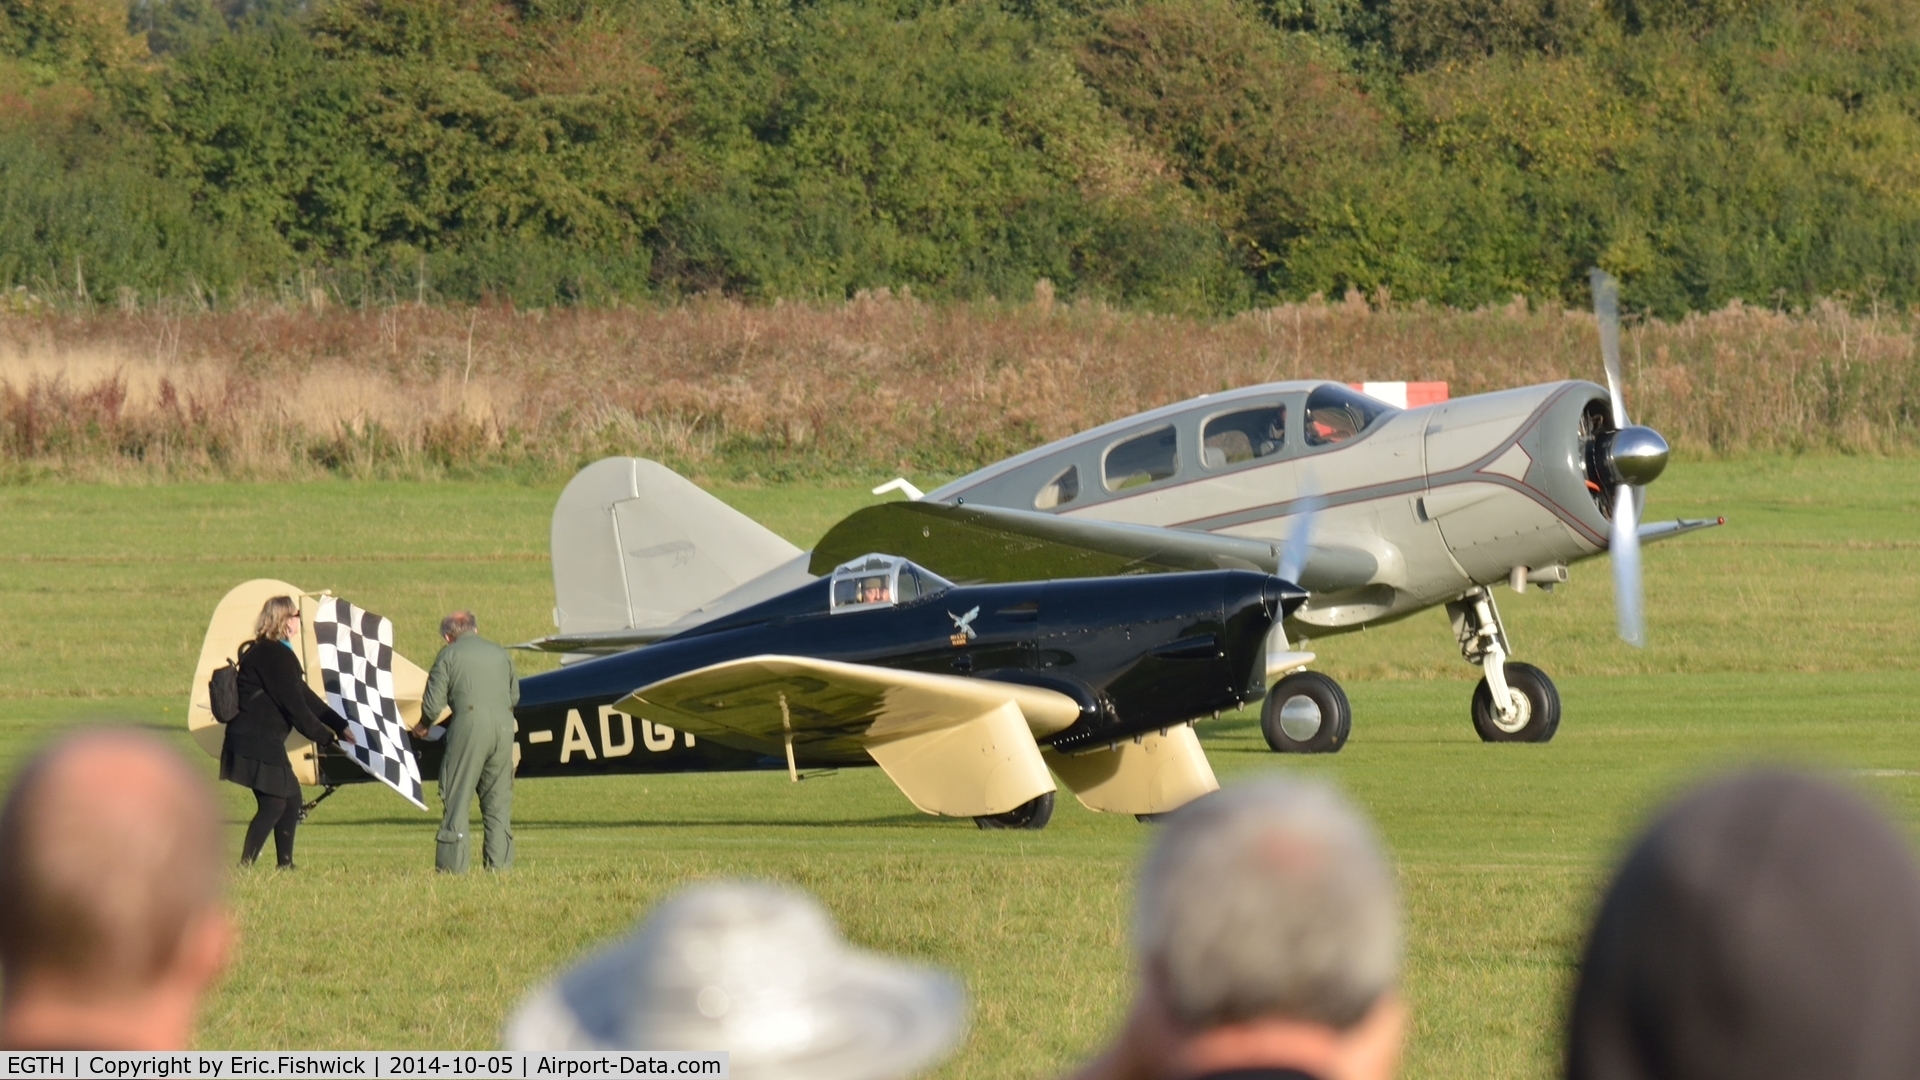 EGTH Airport - The Flag drops for the two fastest aeroplanes at the start line of the Shuttleworth Mock Handicap Air Race, Oct. 2014.